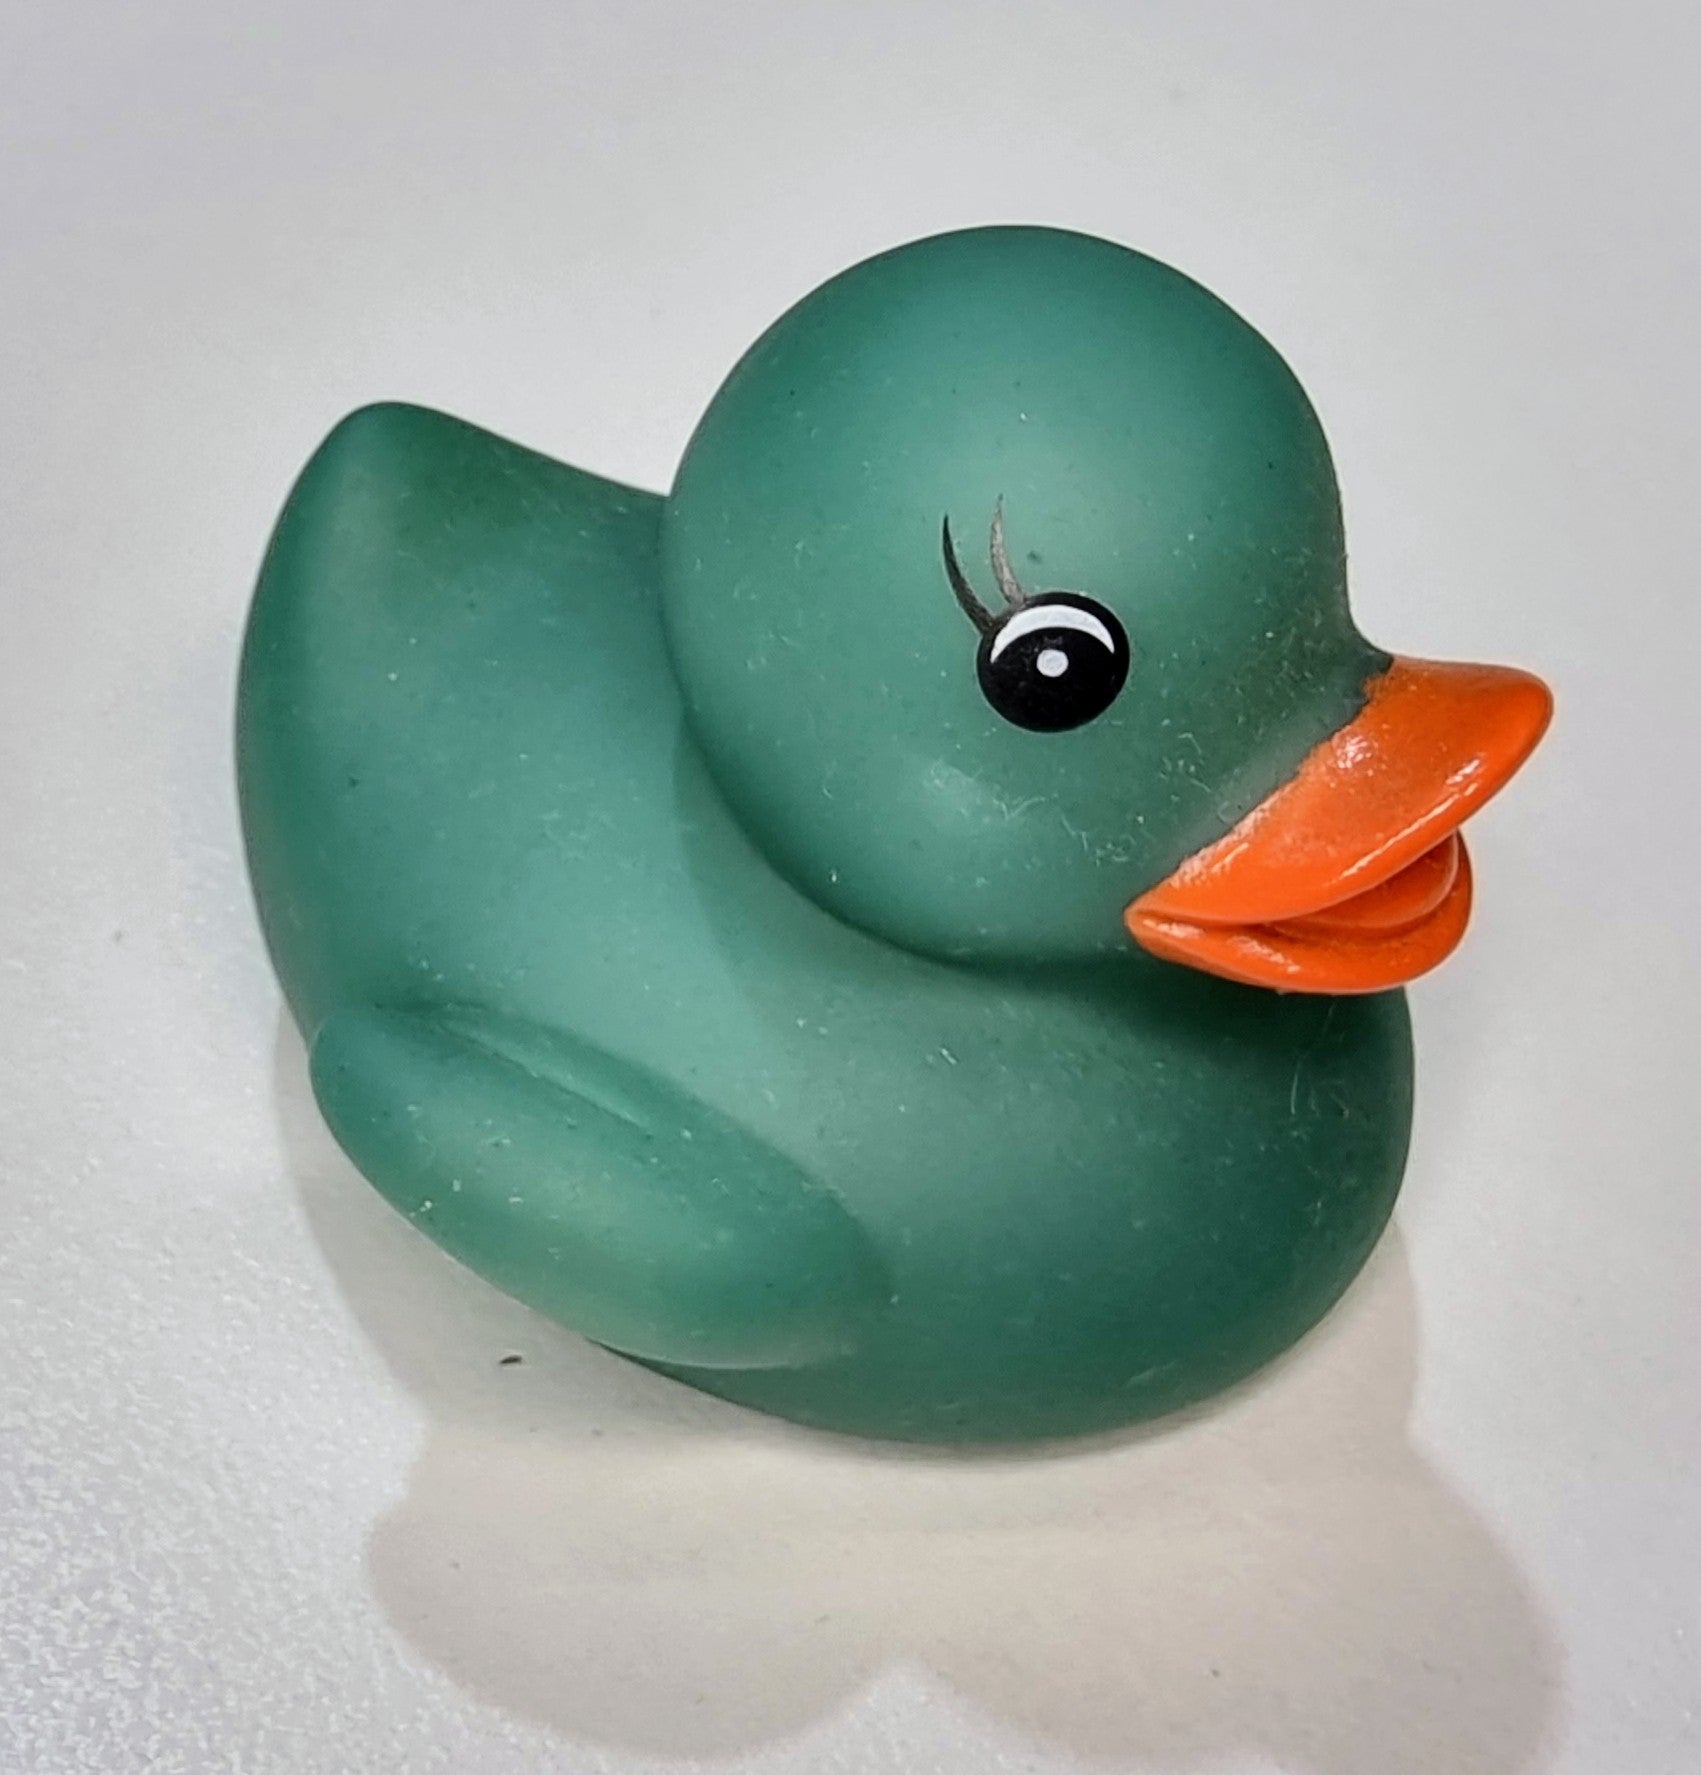 green bath ducky colour changes in warm water. baby bath toy